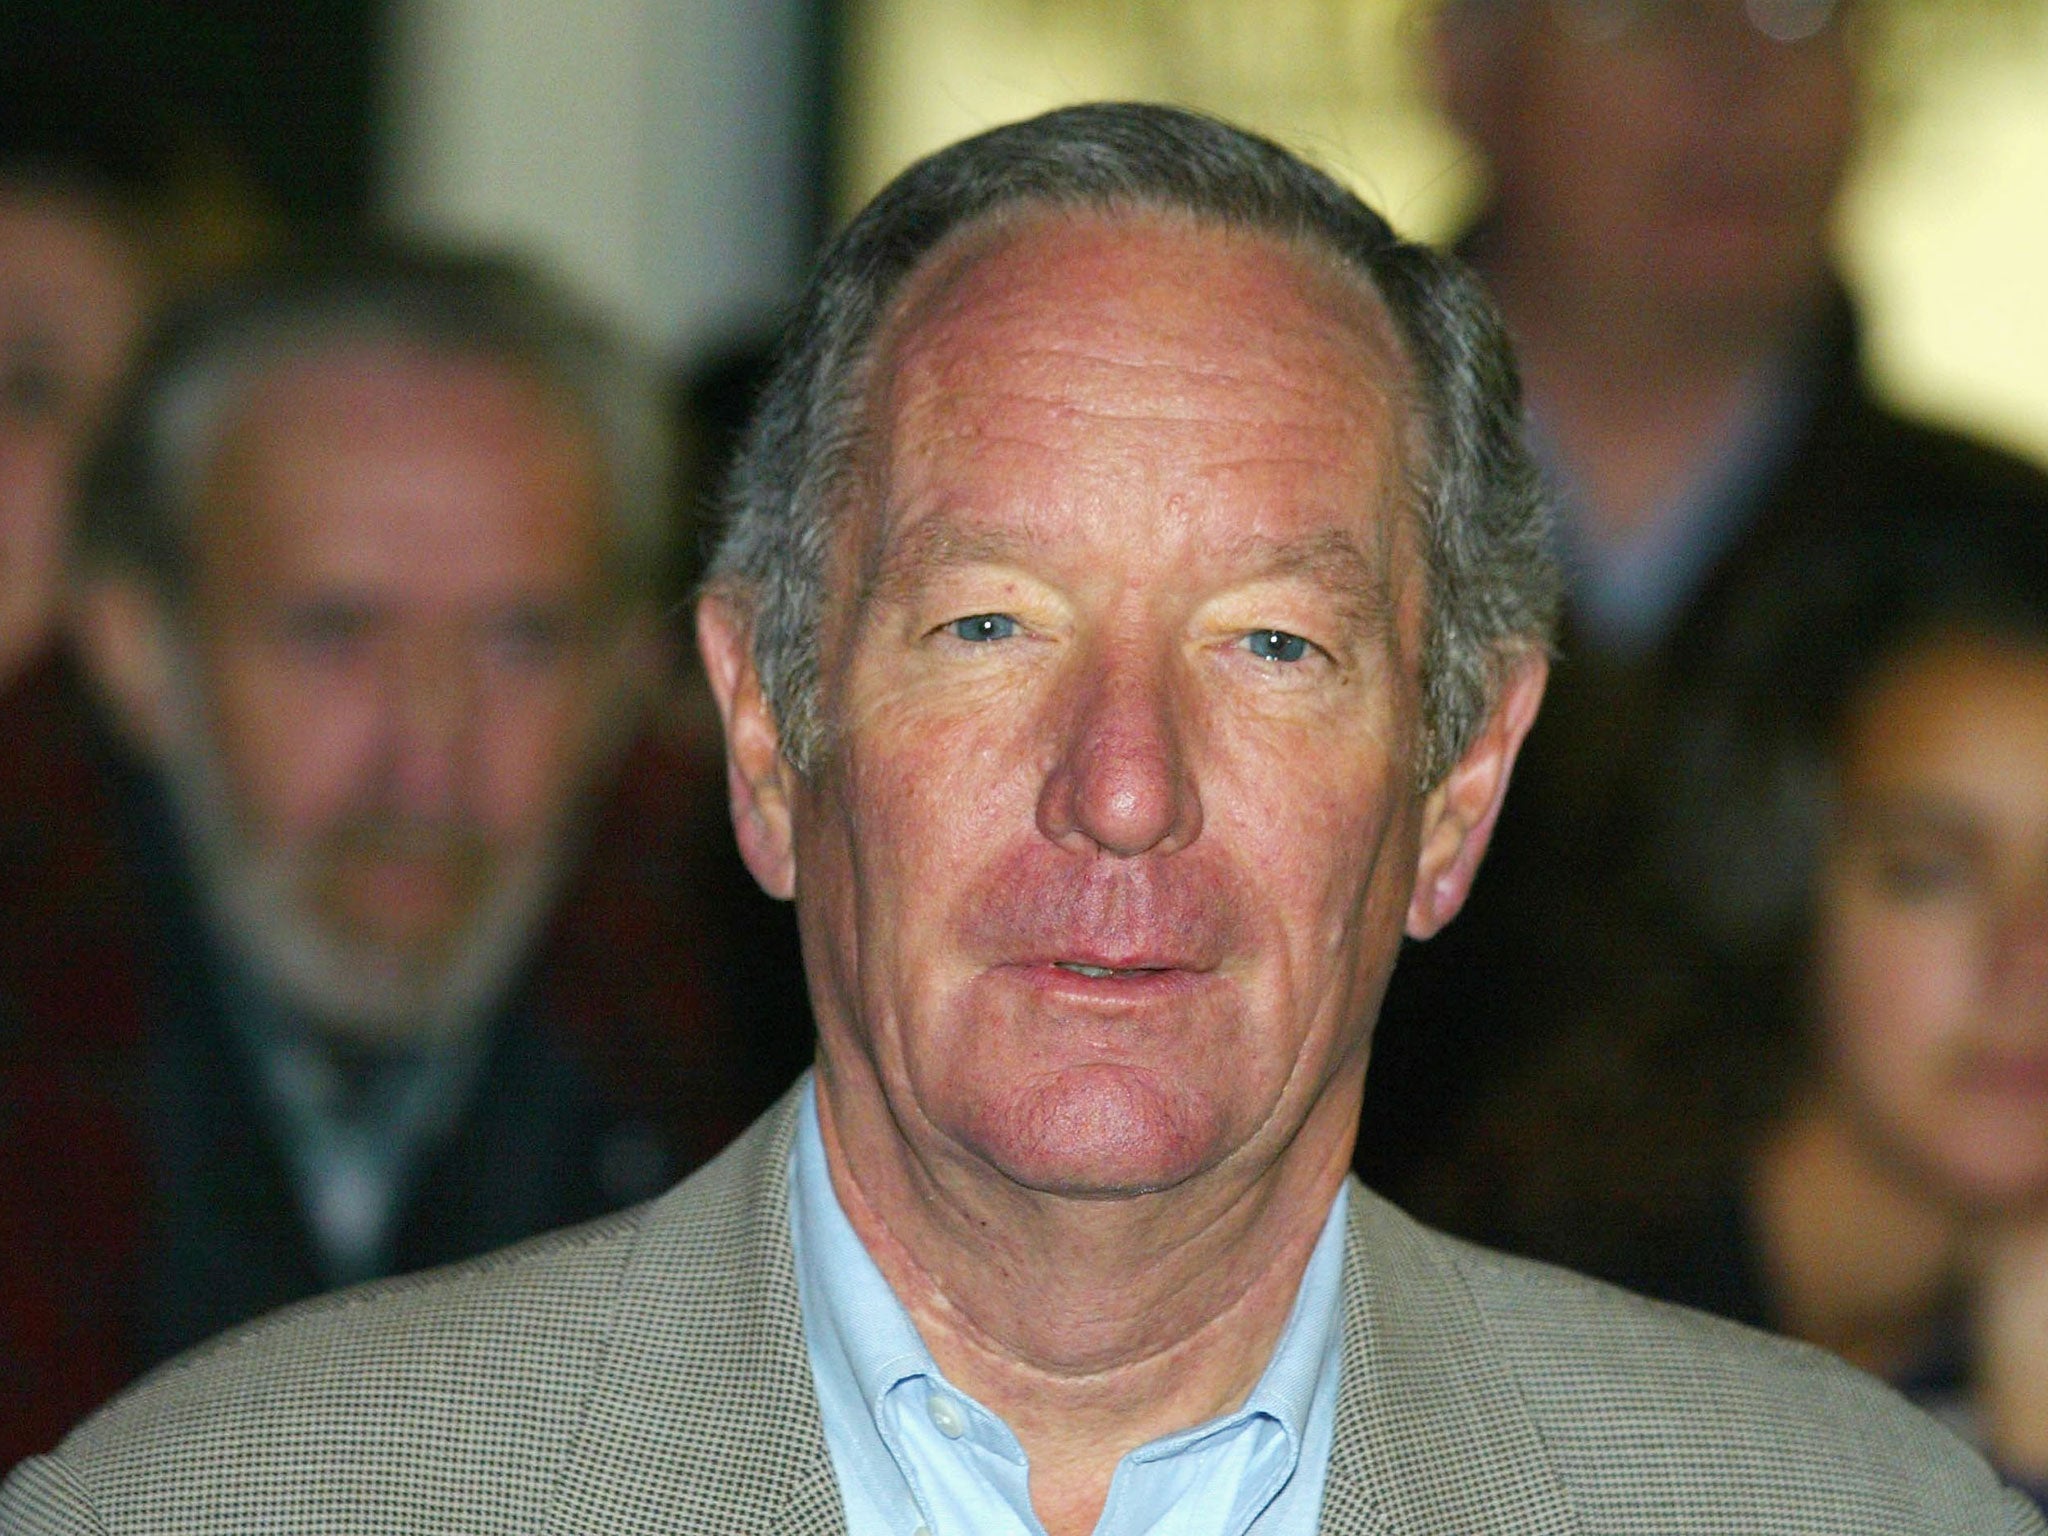 Michael Buerk has hit out at recently-axed channel BBC3 and TV presenters who 'cry ageism'